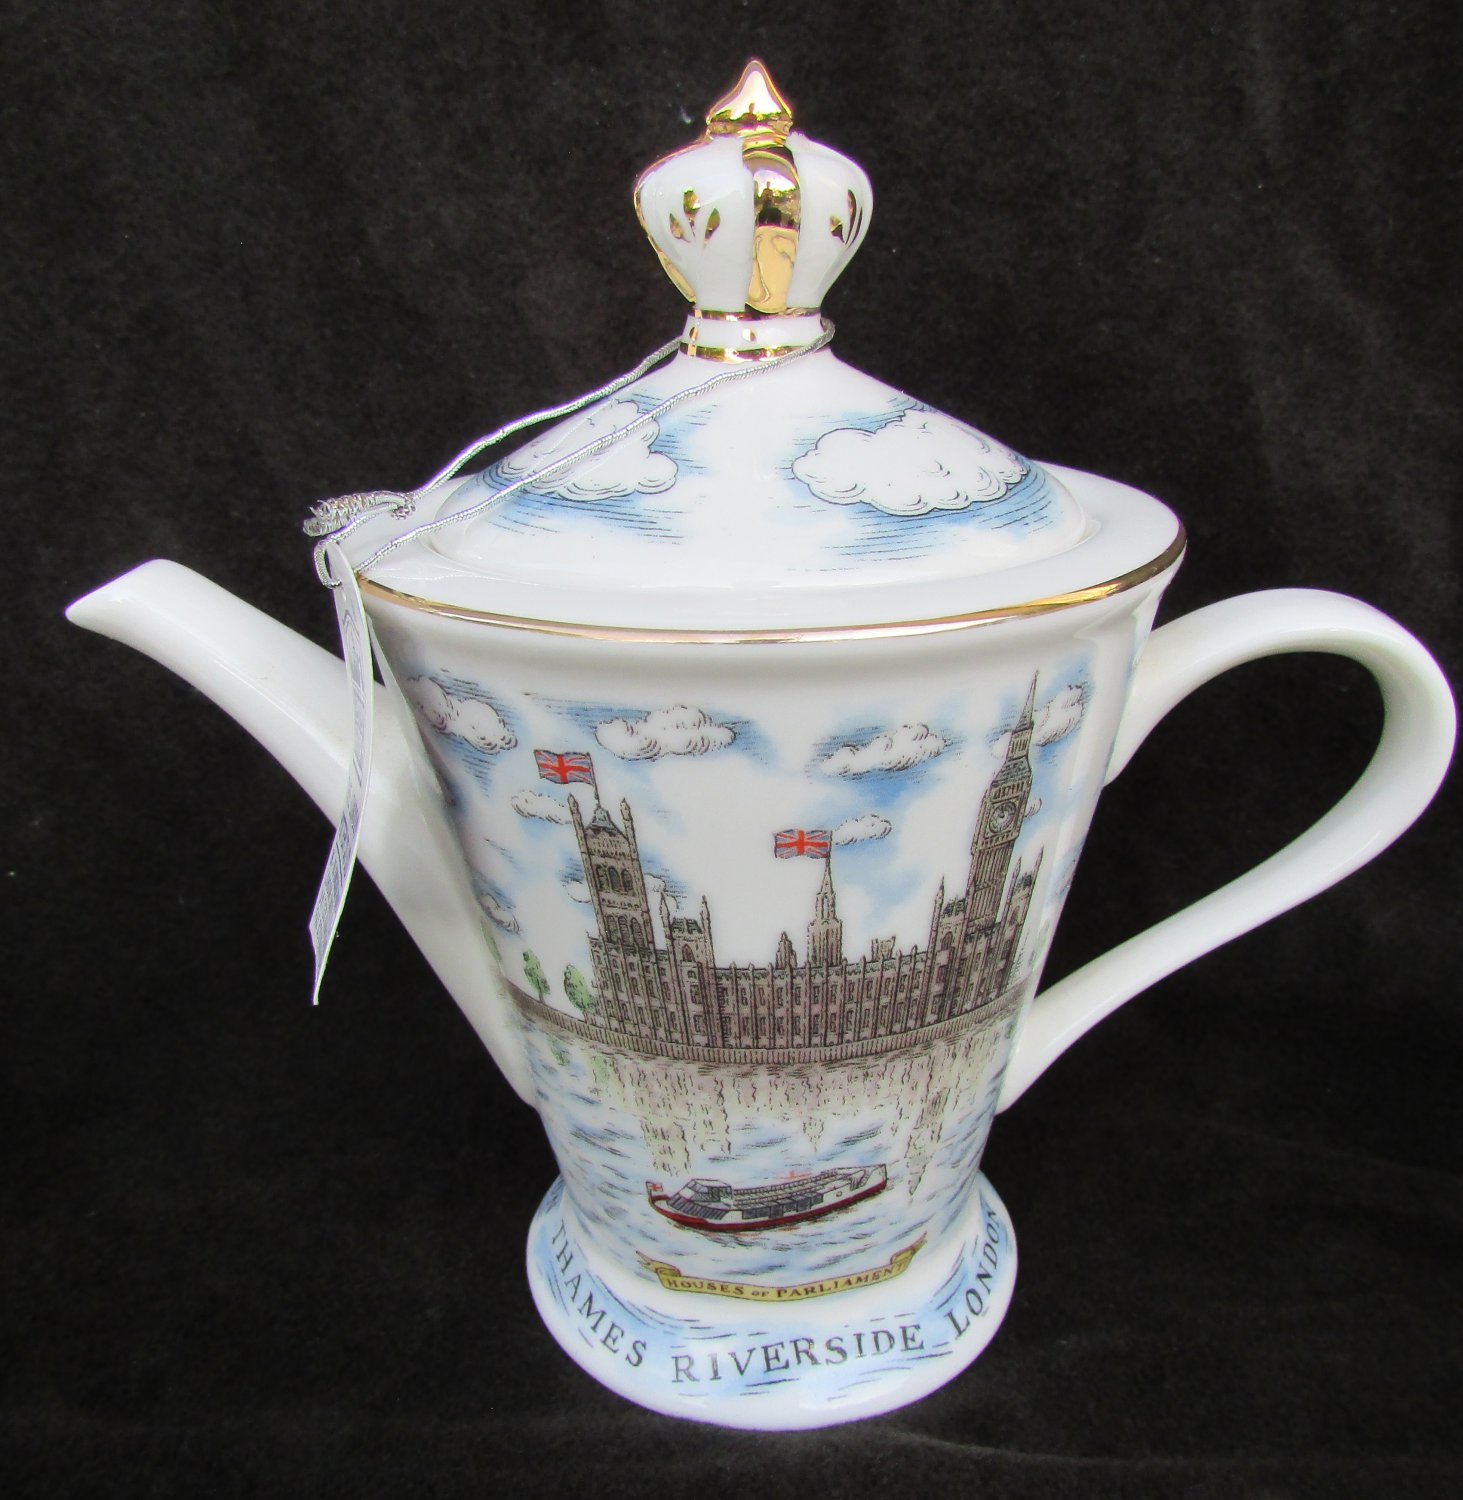 David Birch teapot House of Parliament Reflections with tag porcelain London